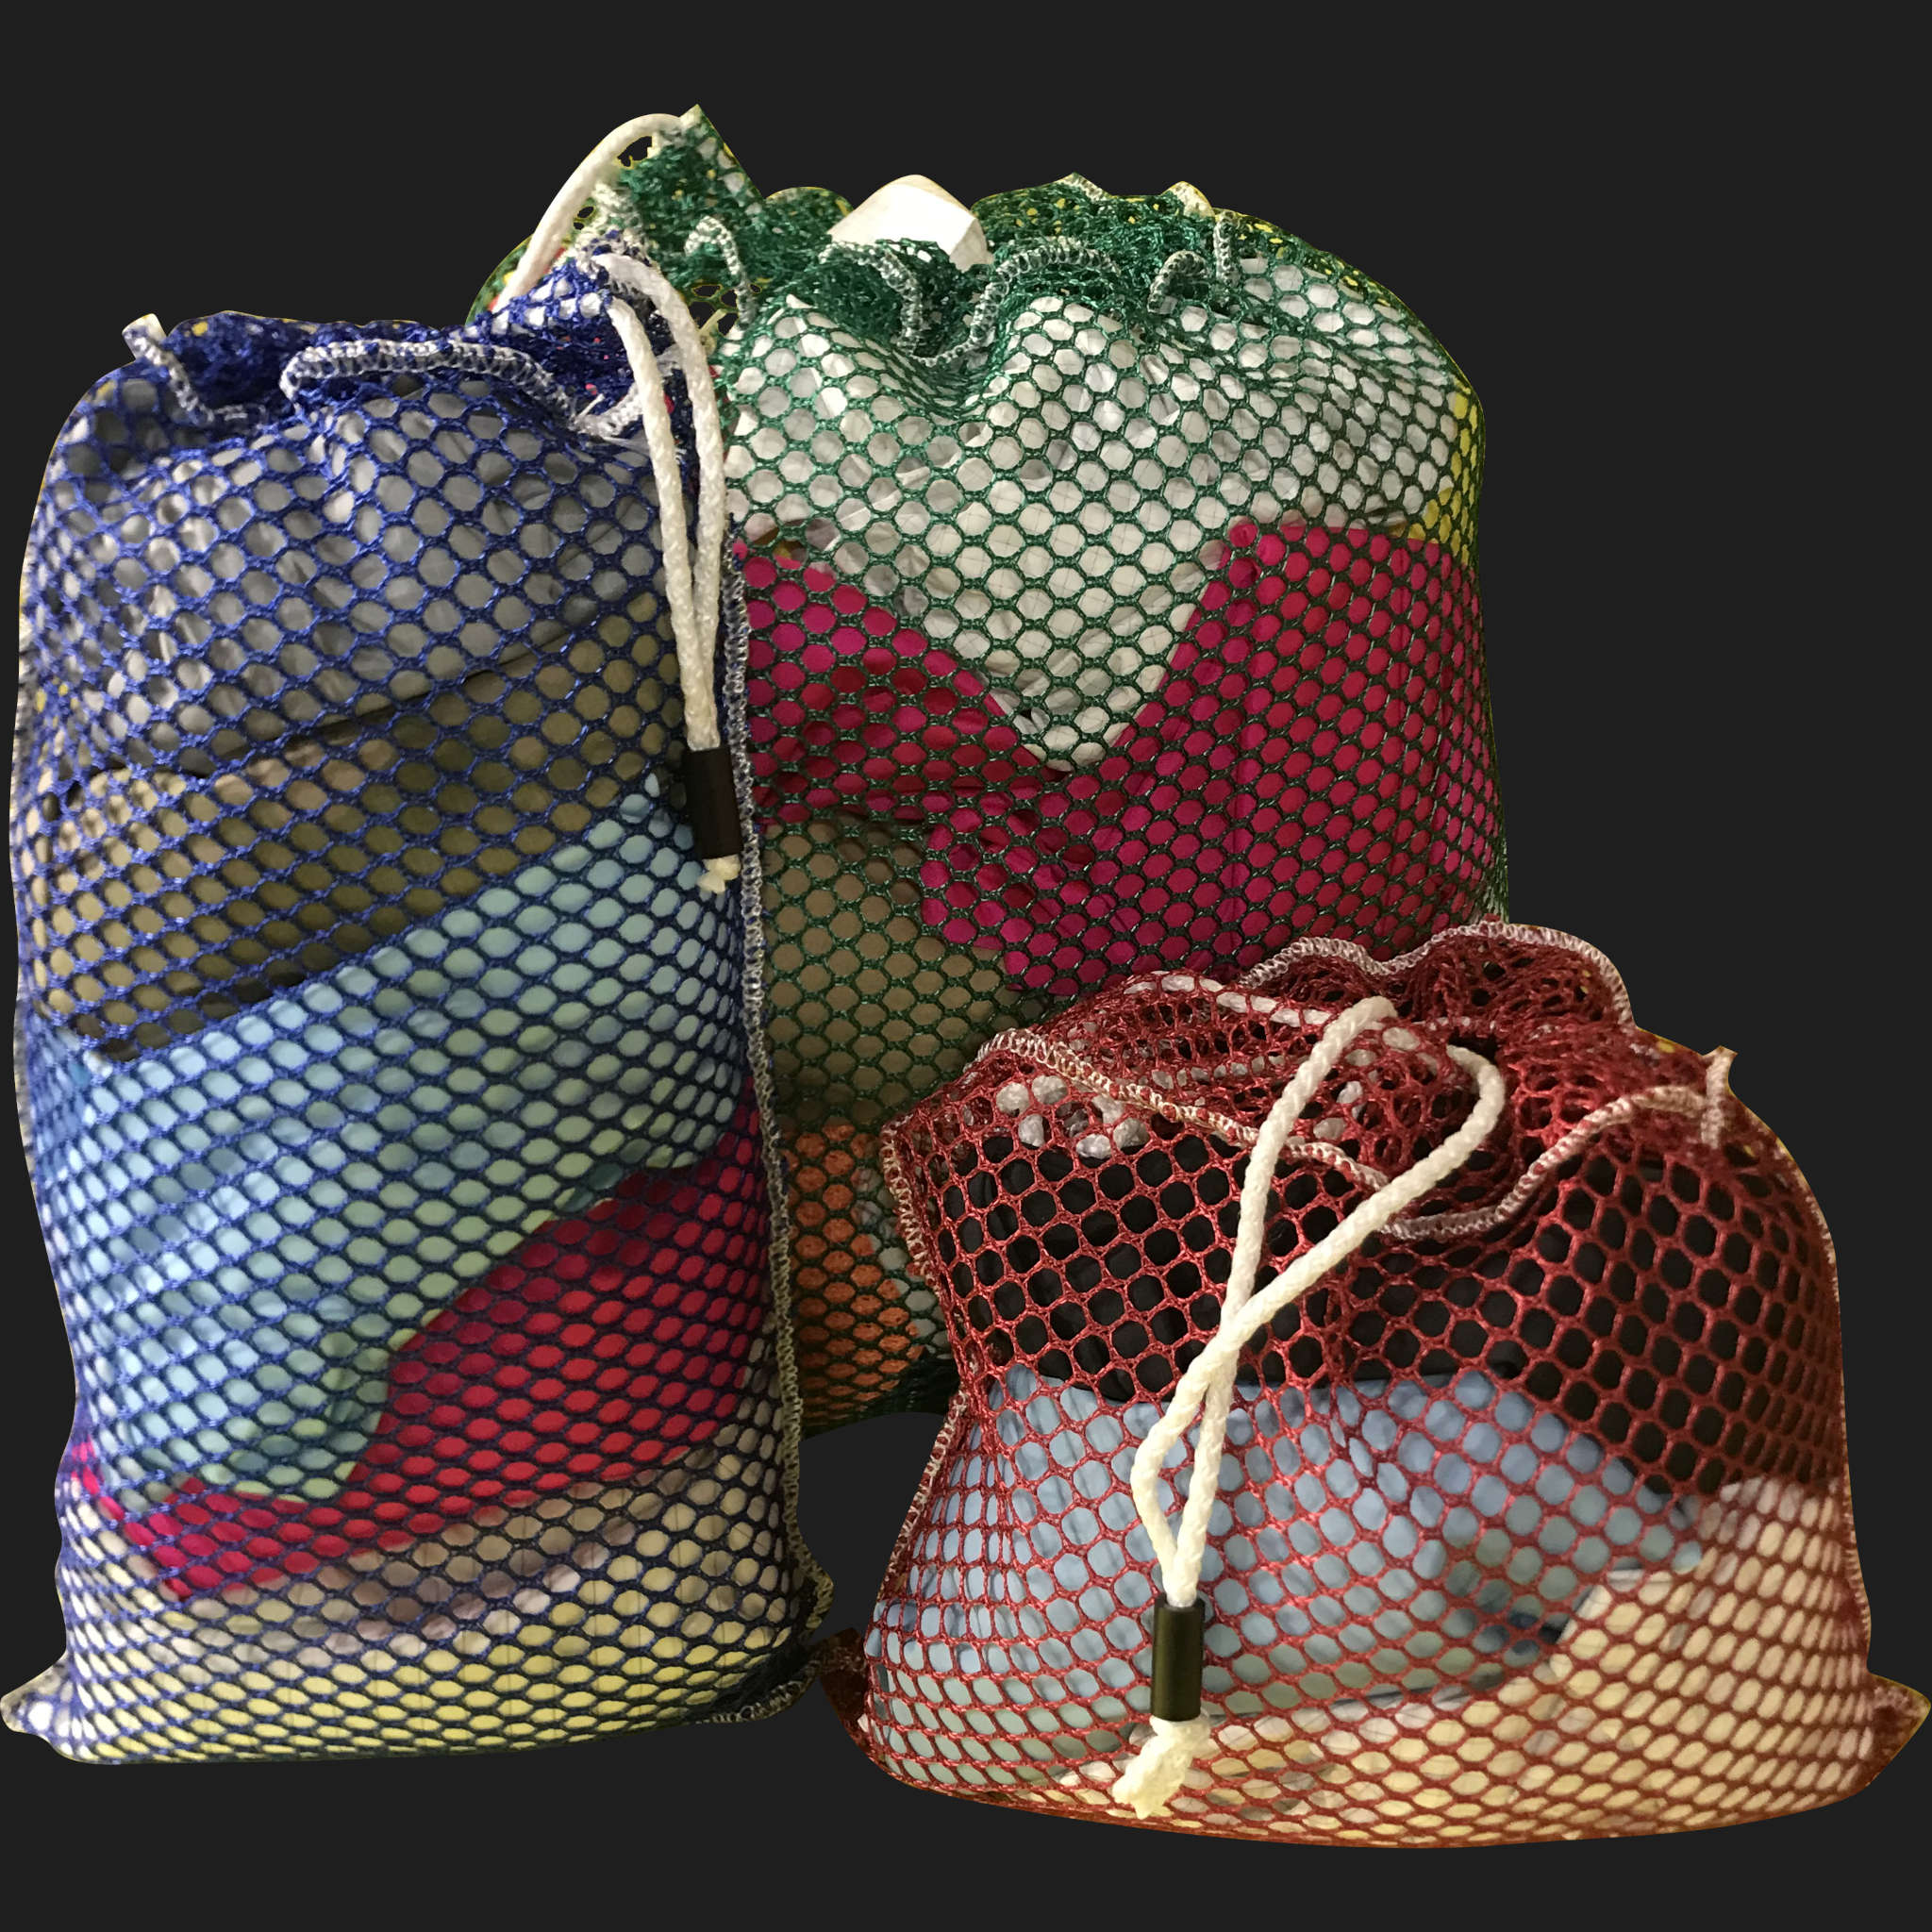 48" x 76" Customized Mesh-Net-Laundry Bags Heavy Duty with Cord and barrellock closure